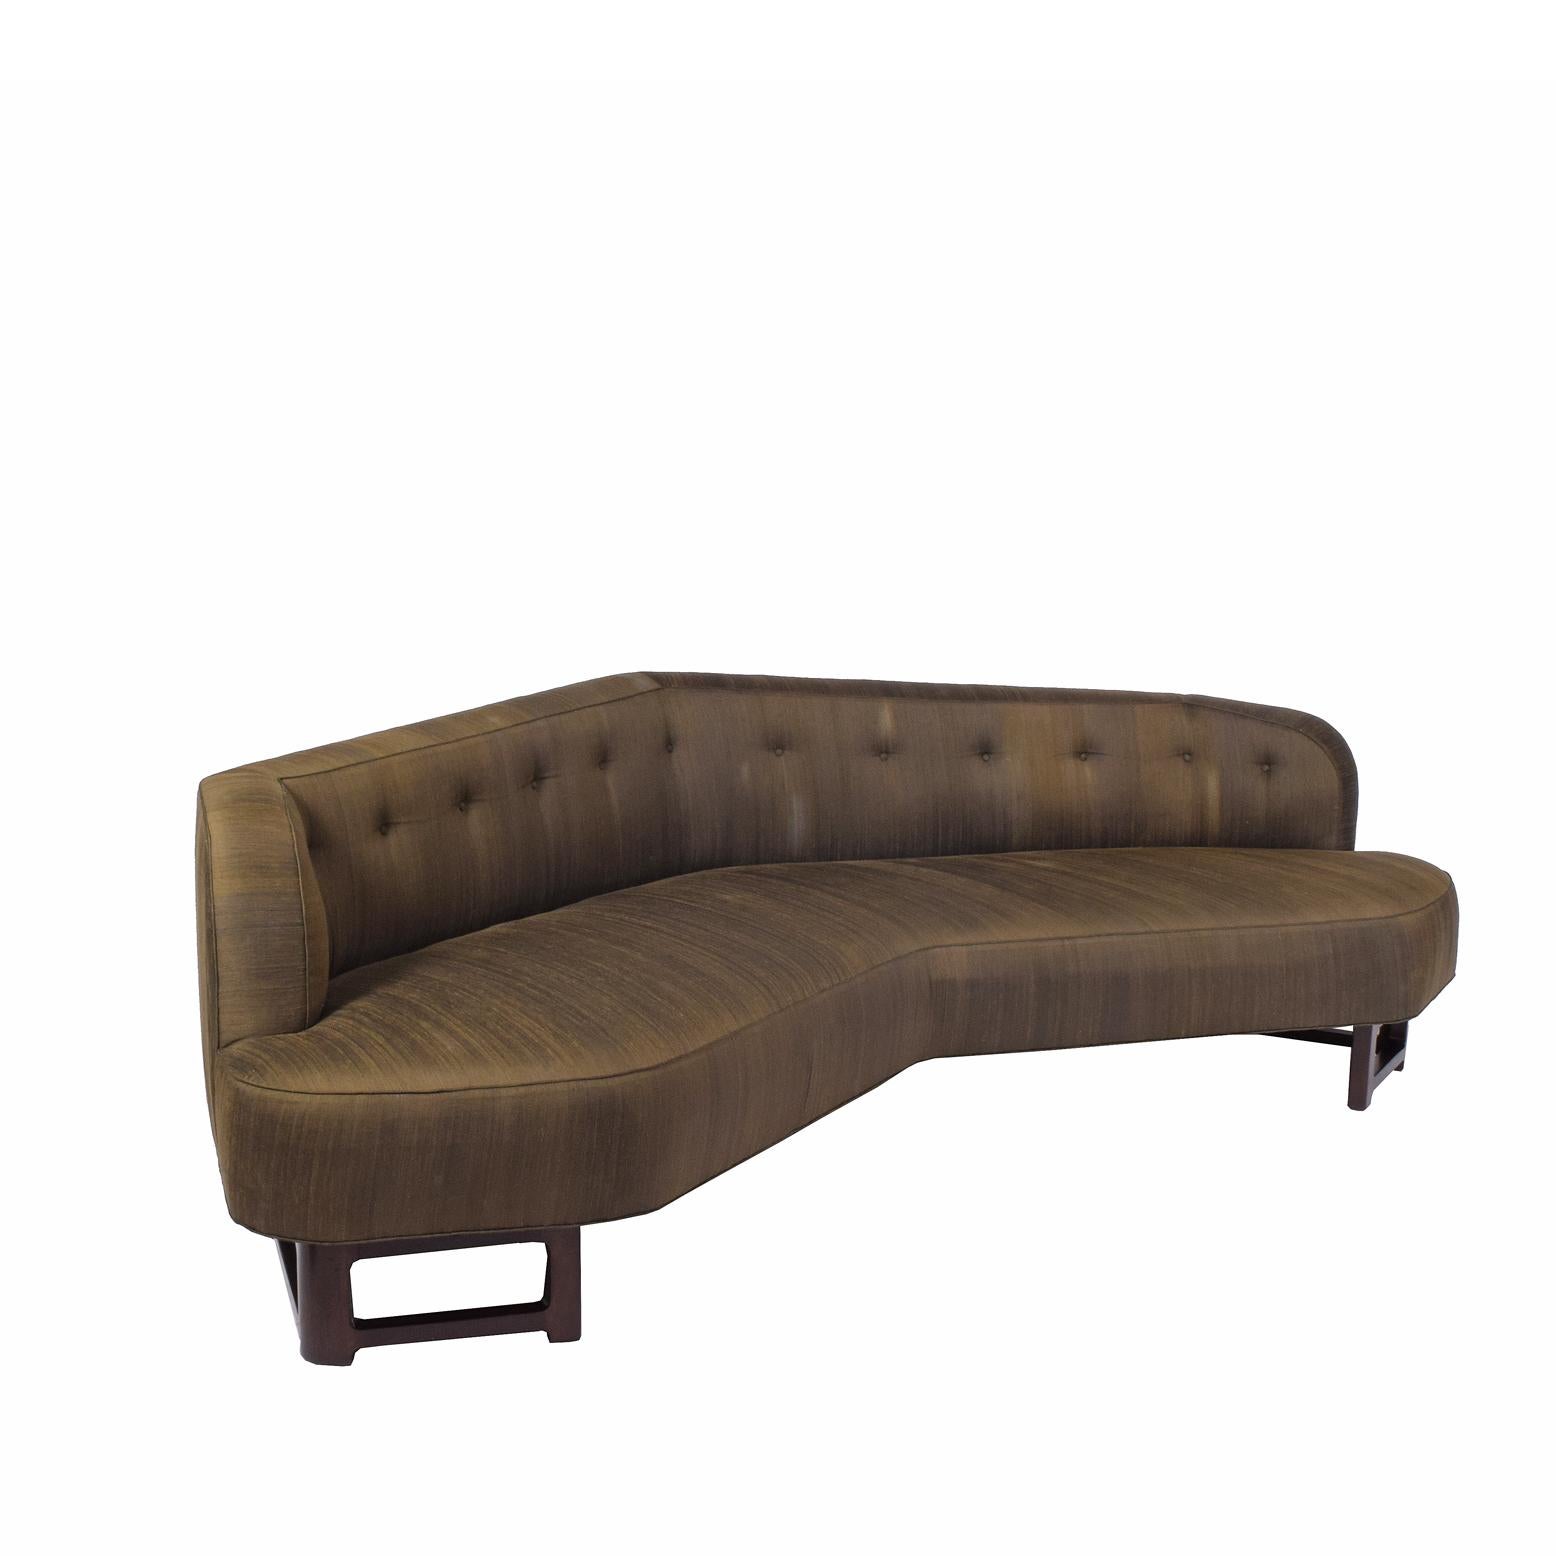 V-angle sofa design by Edward Wormley for Dunbar upholstery in silk fabric on solid mahogany frame original condition.